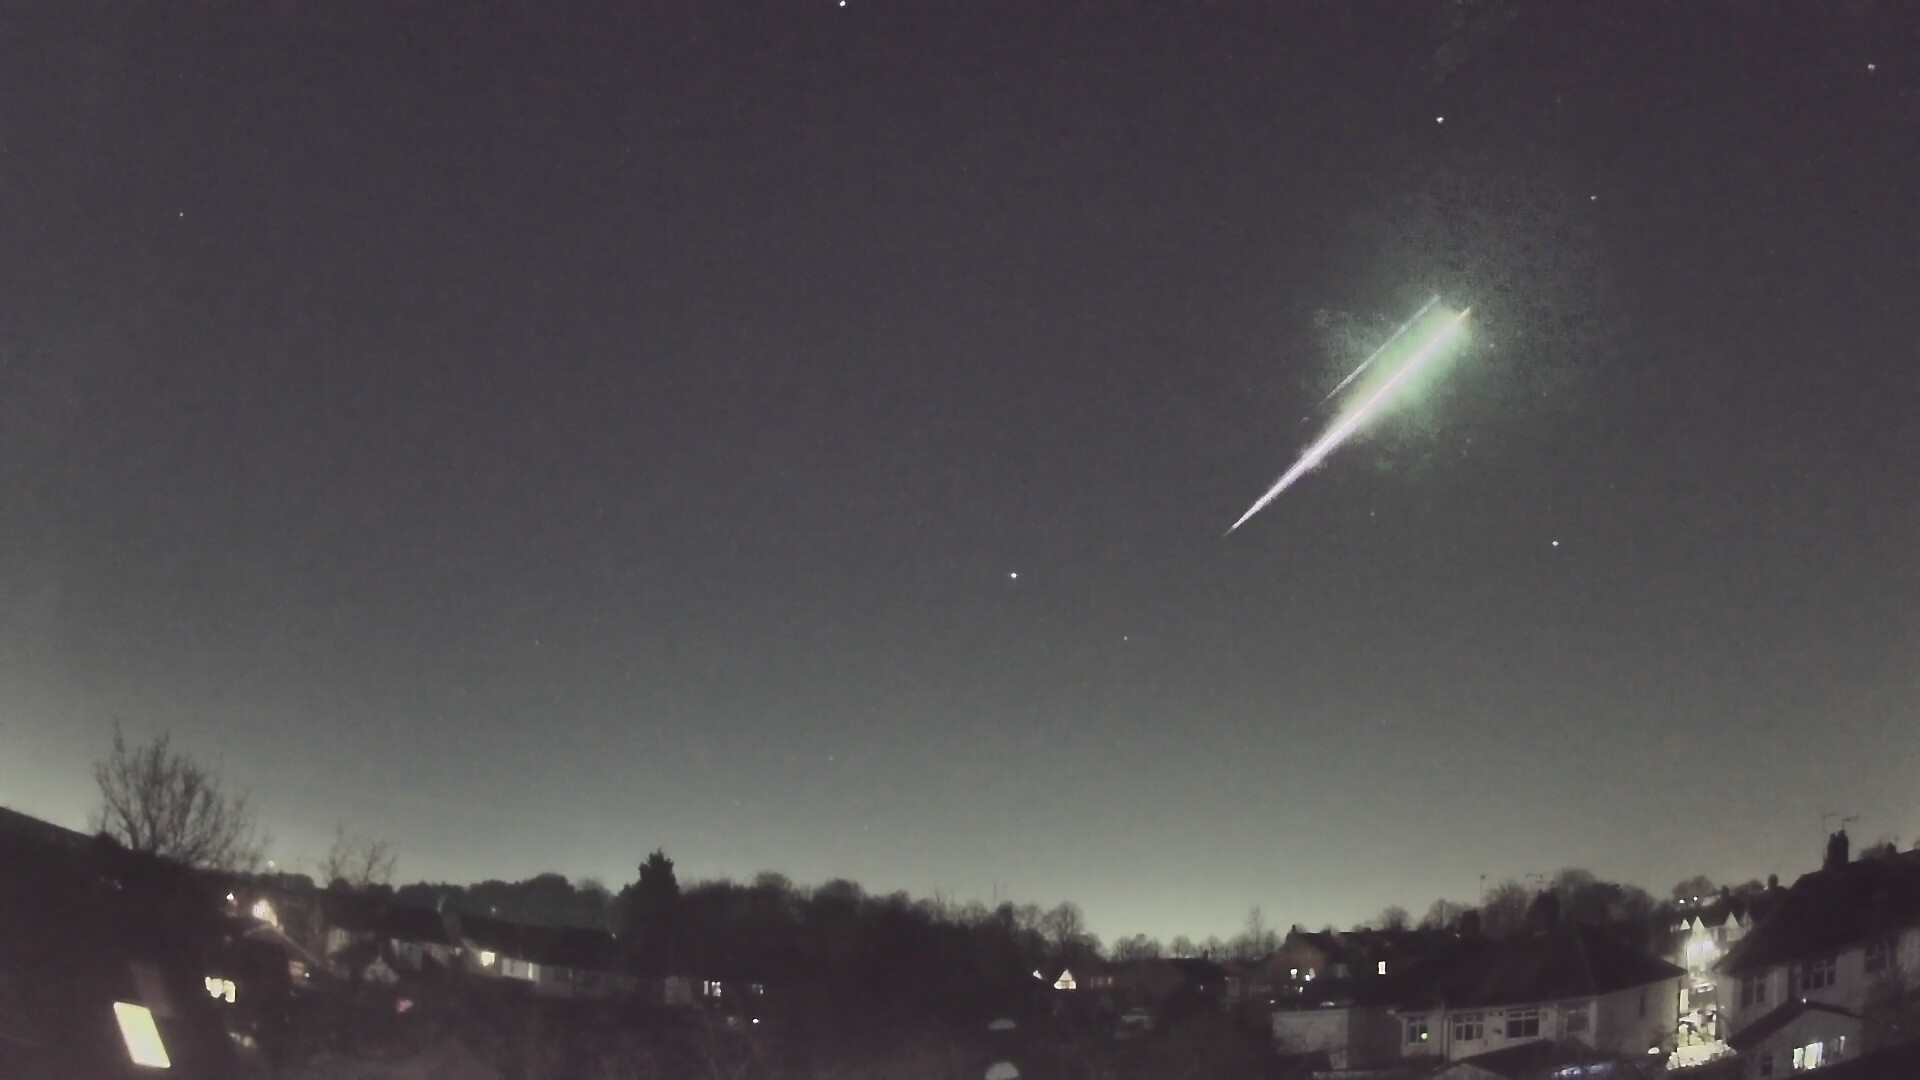 The fireball, as seen over the UK and northern Europe on Feb. 28, 2021. (Image: Ben Stanley/Markus Kempf/AllSky7 network via the University of Manchester)